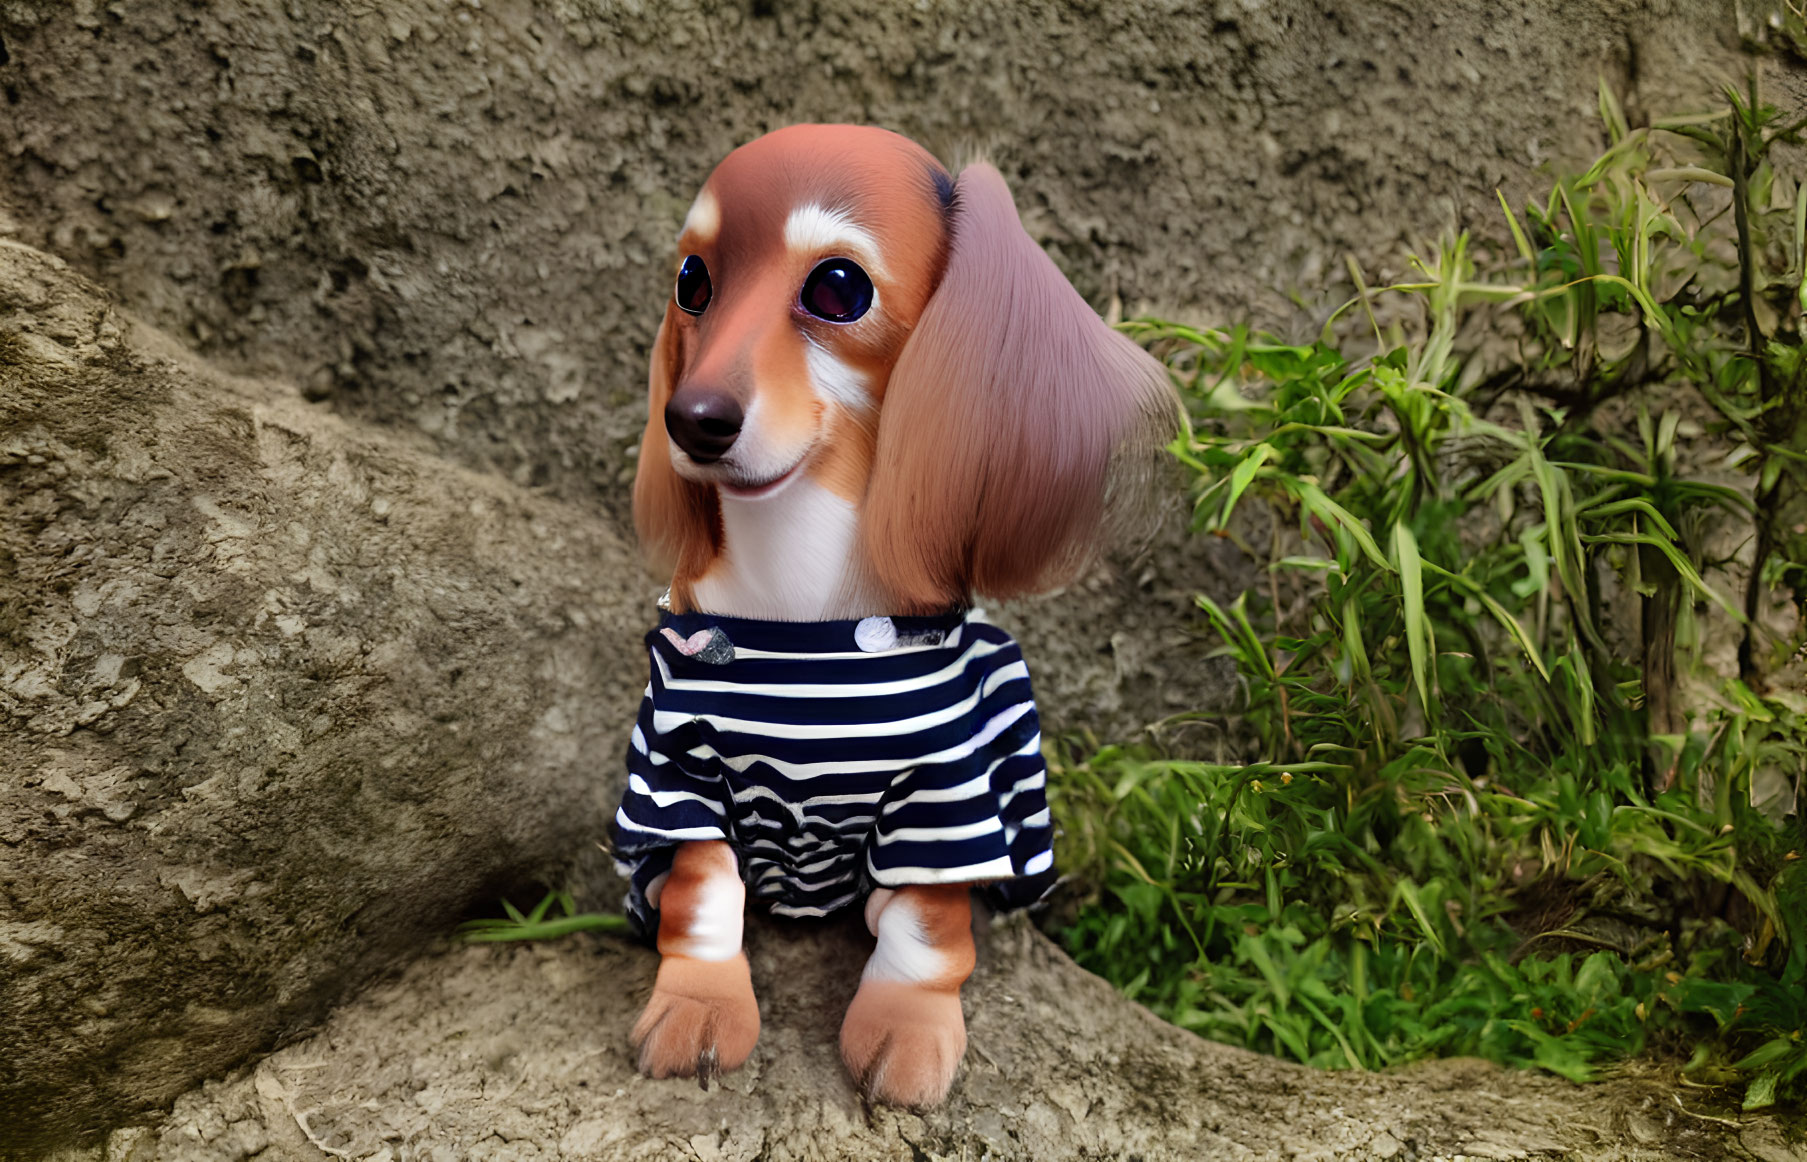 Digitally altered image of dachshund with oversized human head in striped shirt by rock and plants